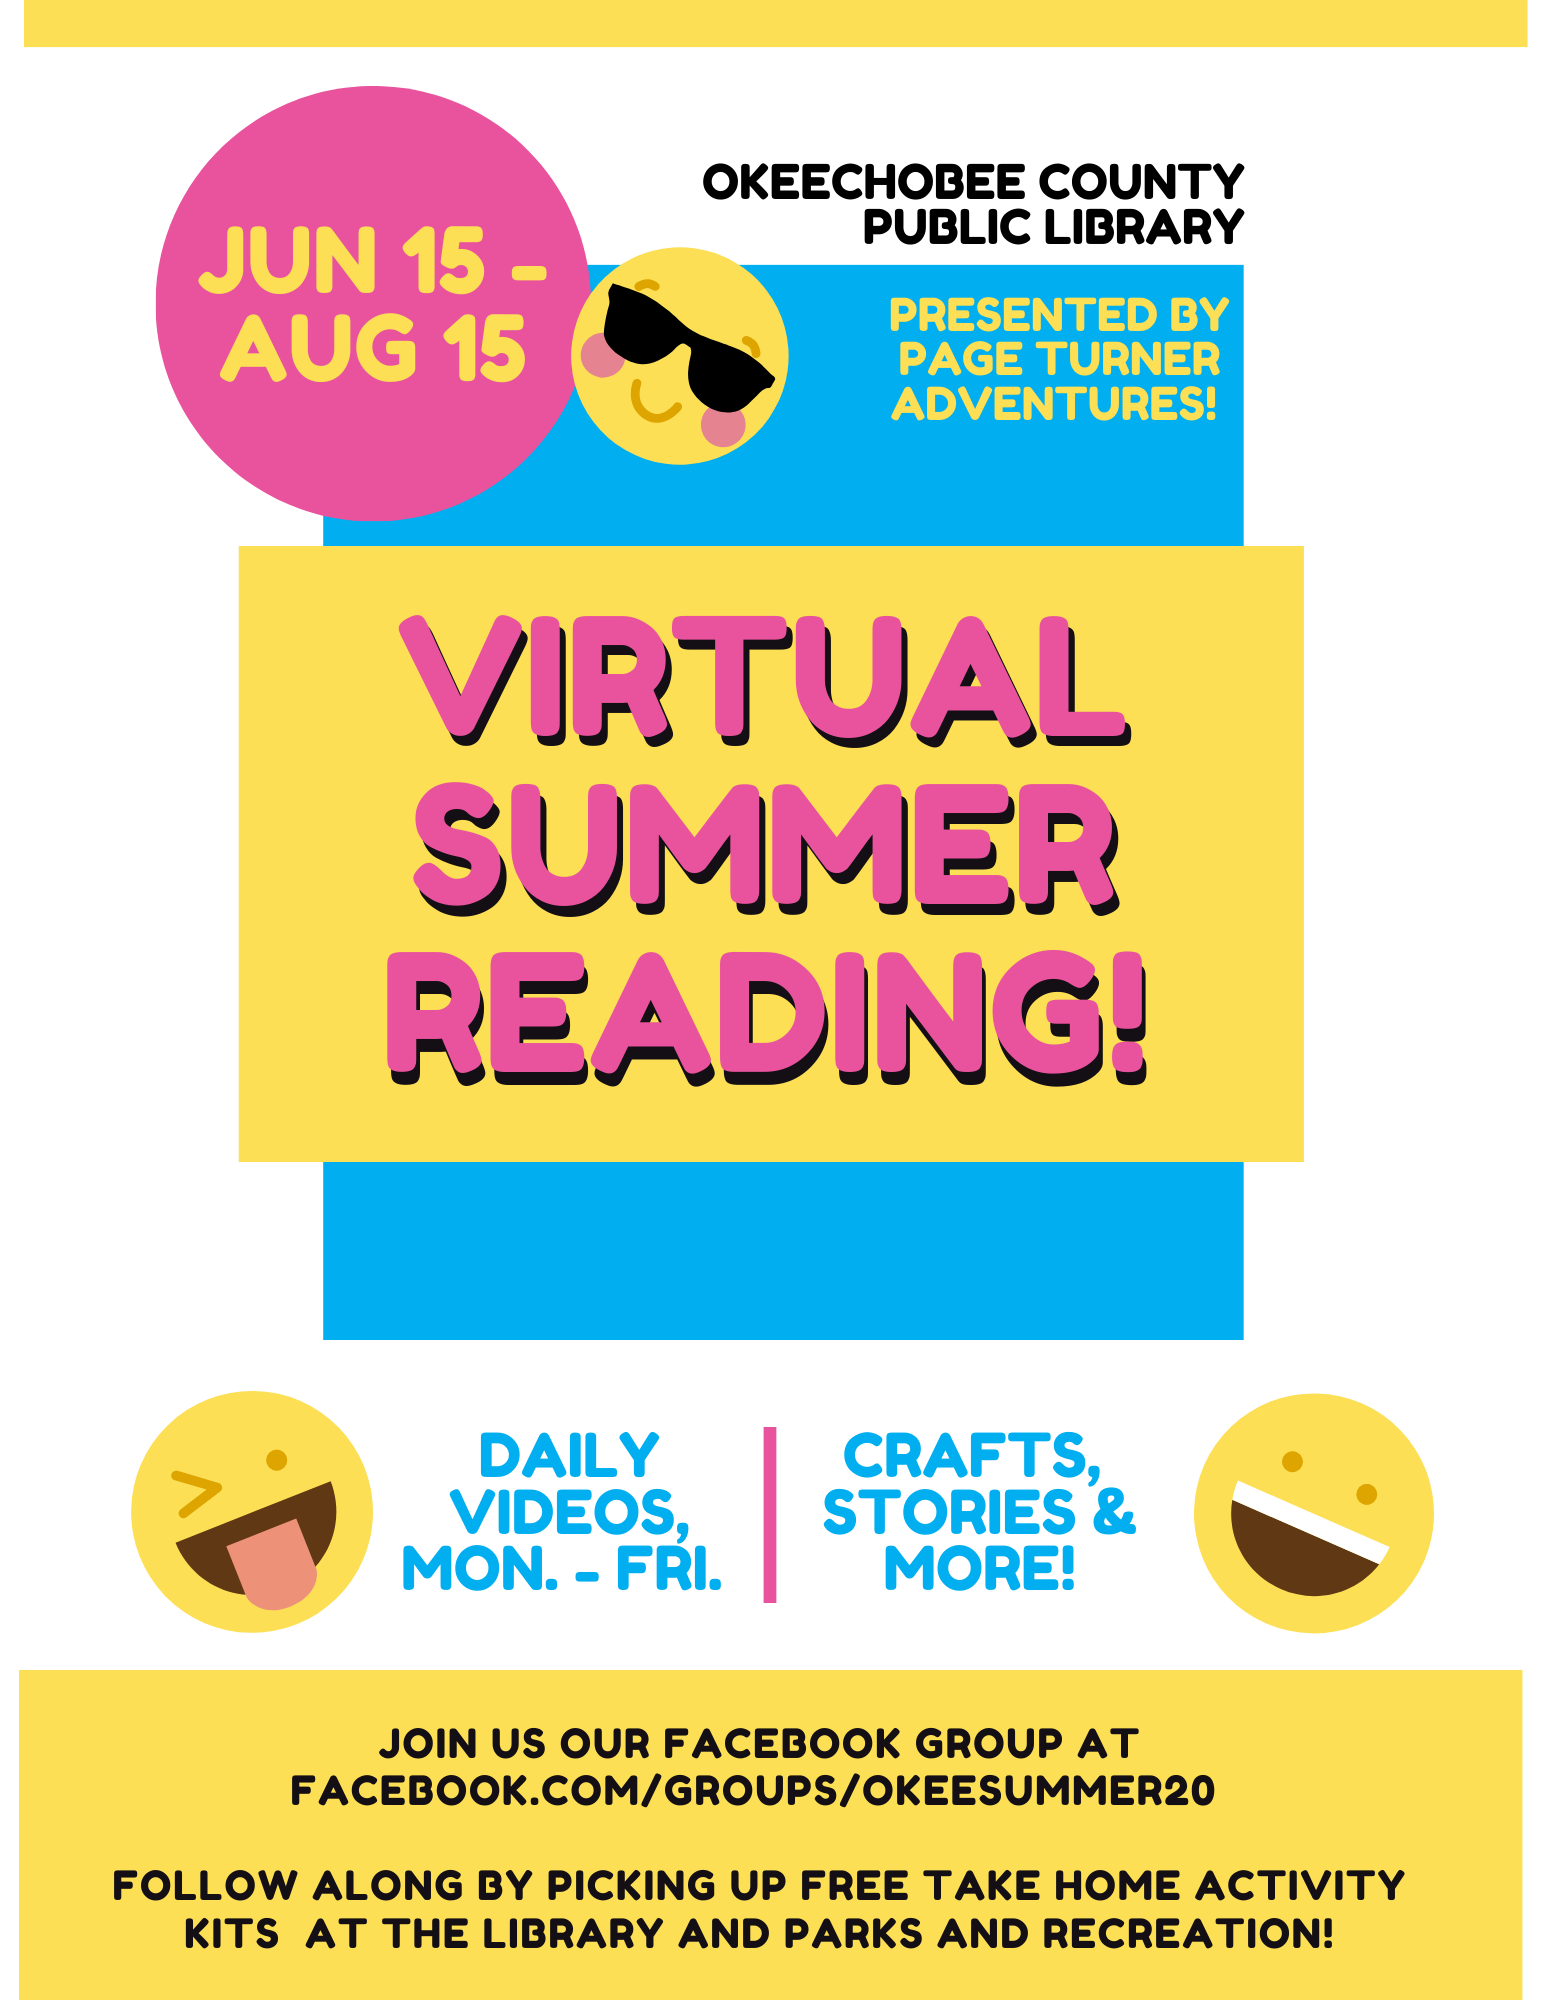 This year the Okeechobee County Public Library is bringing you a VIRTUAL Summer Reading Program on Facebook! To participate just join our private facebook group Okeechobee Library's Virtual Summer Reading! at facebook.com/groups/okeesummer20 The programming will include comedy story theater shows, crafts, recipes, author interviews, guest performers, contests, games, and much more. Two free take home activity kits will be available weekly at the Okeechobee Public Library and the Okeechobee Parks and Recreation office for this program! 